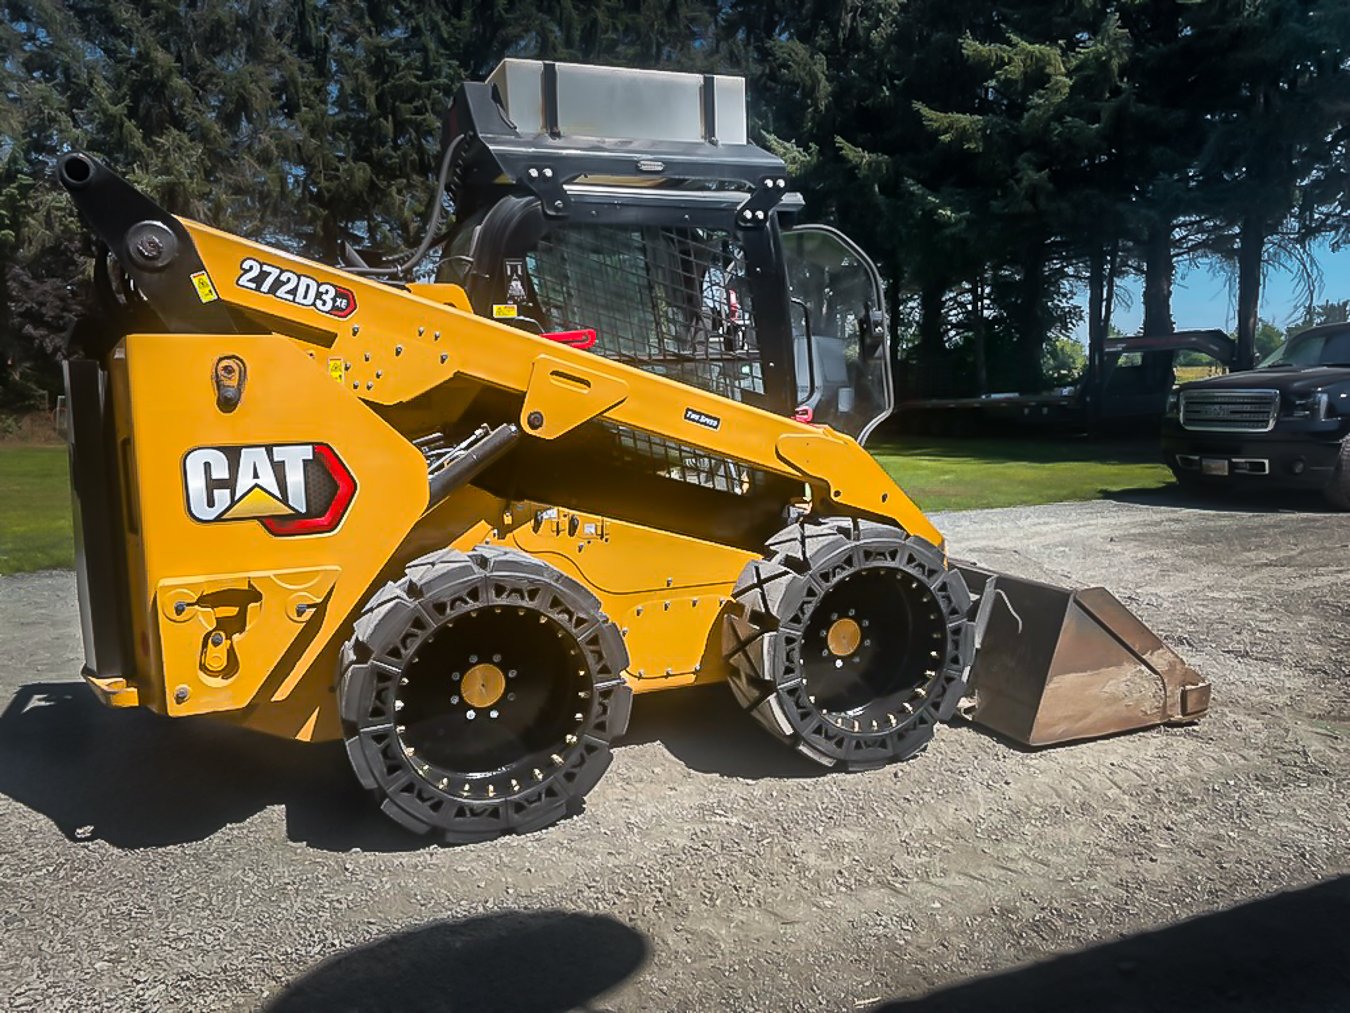 This images shows a CAT 272D3 HS with our 12x16 5 Bobcat Tires